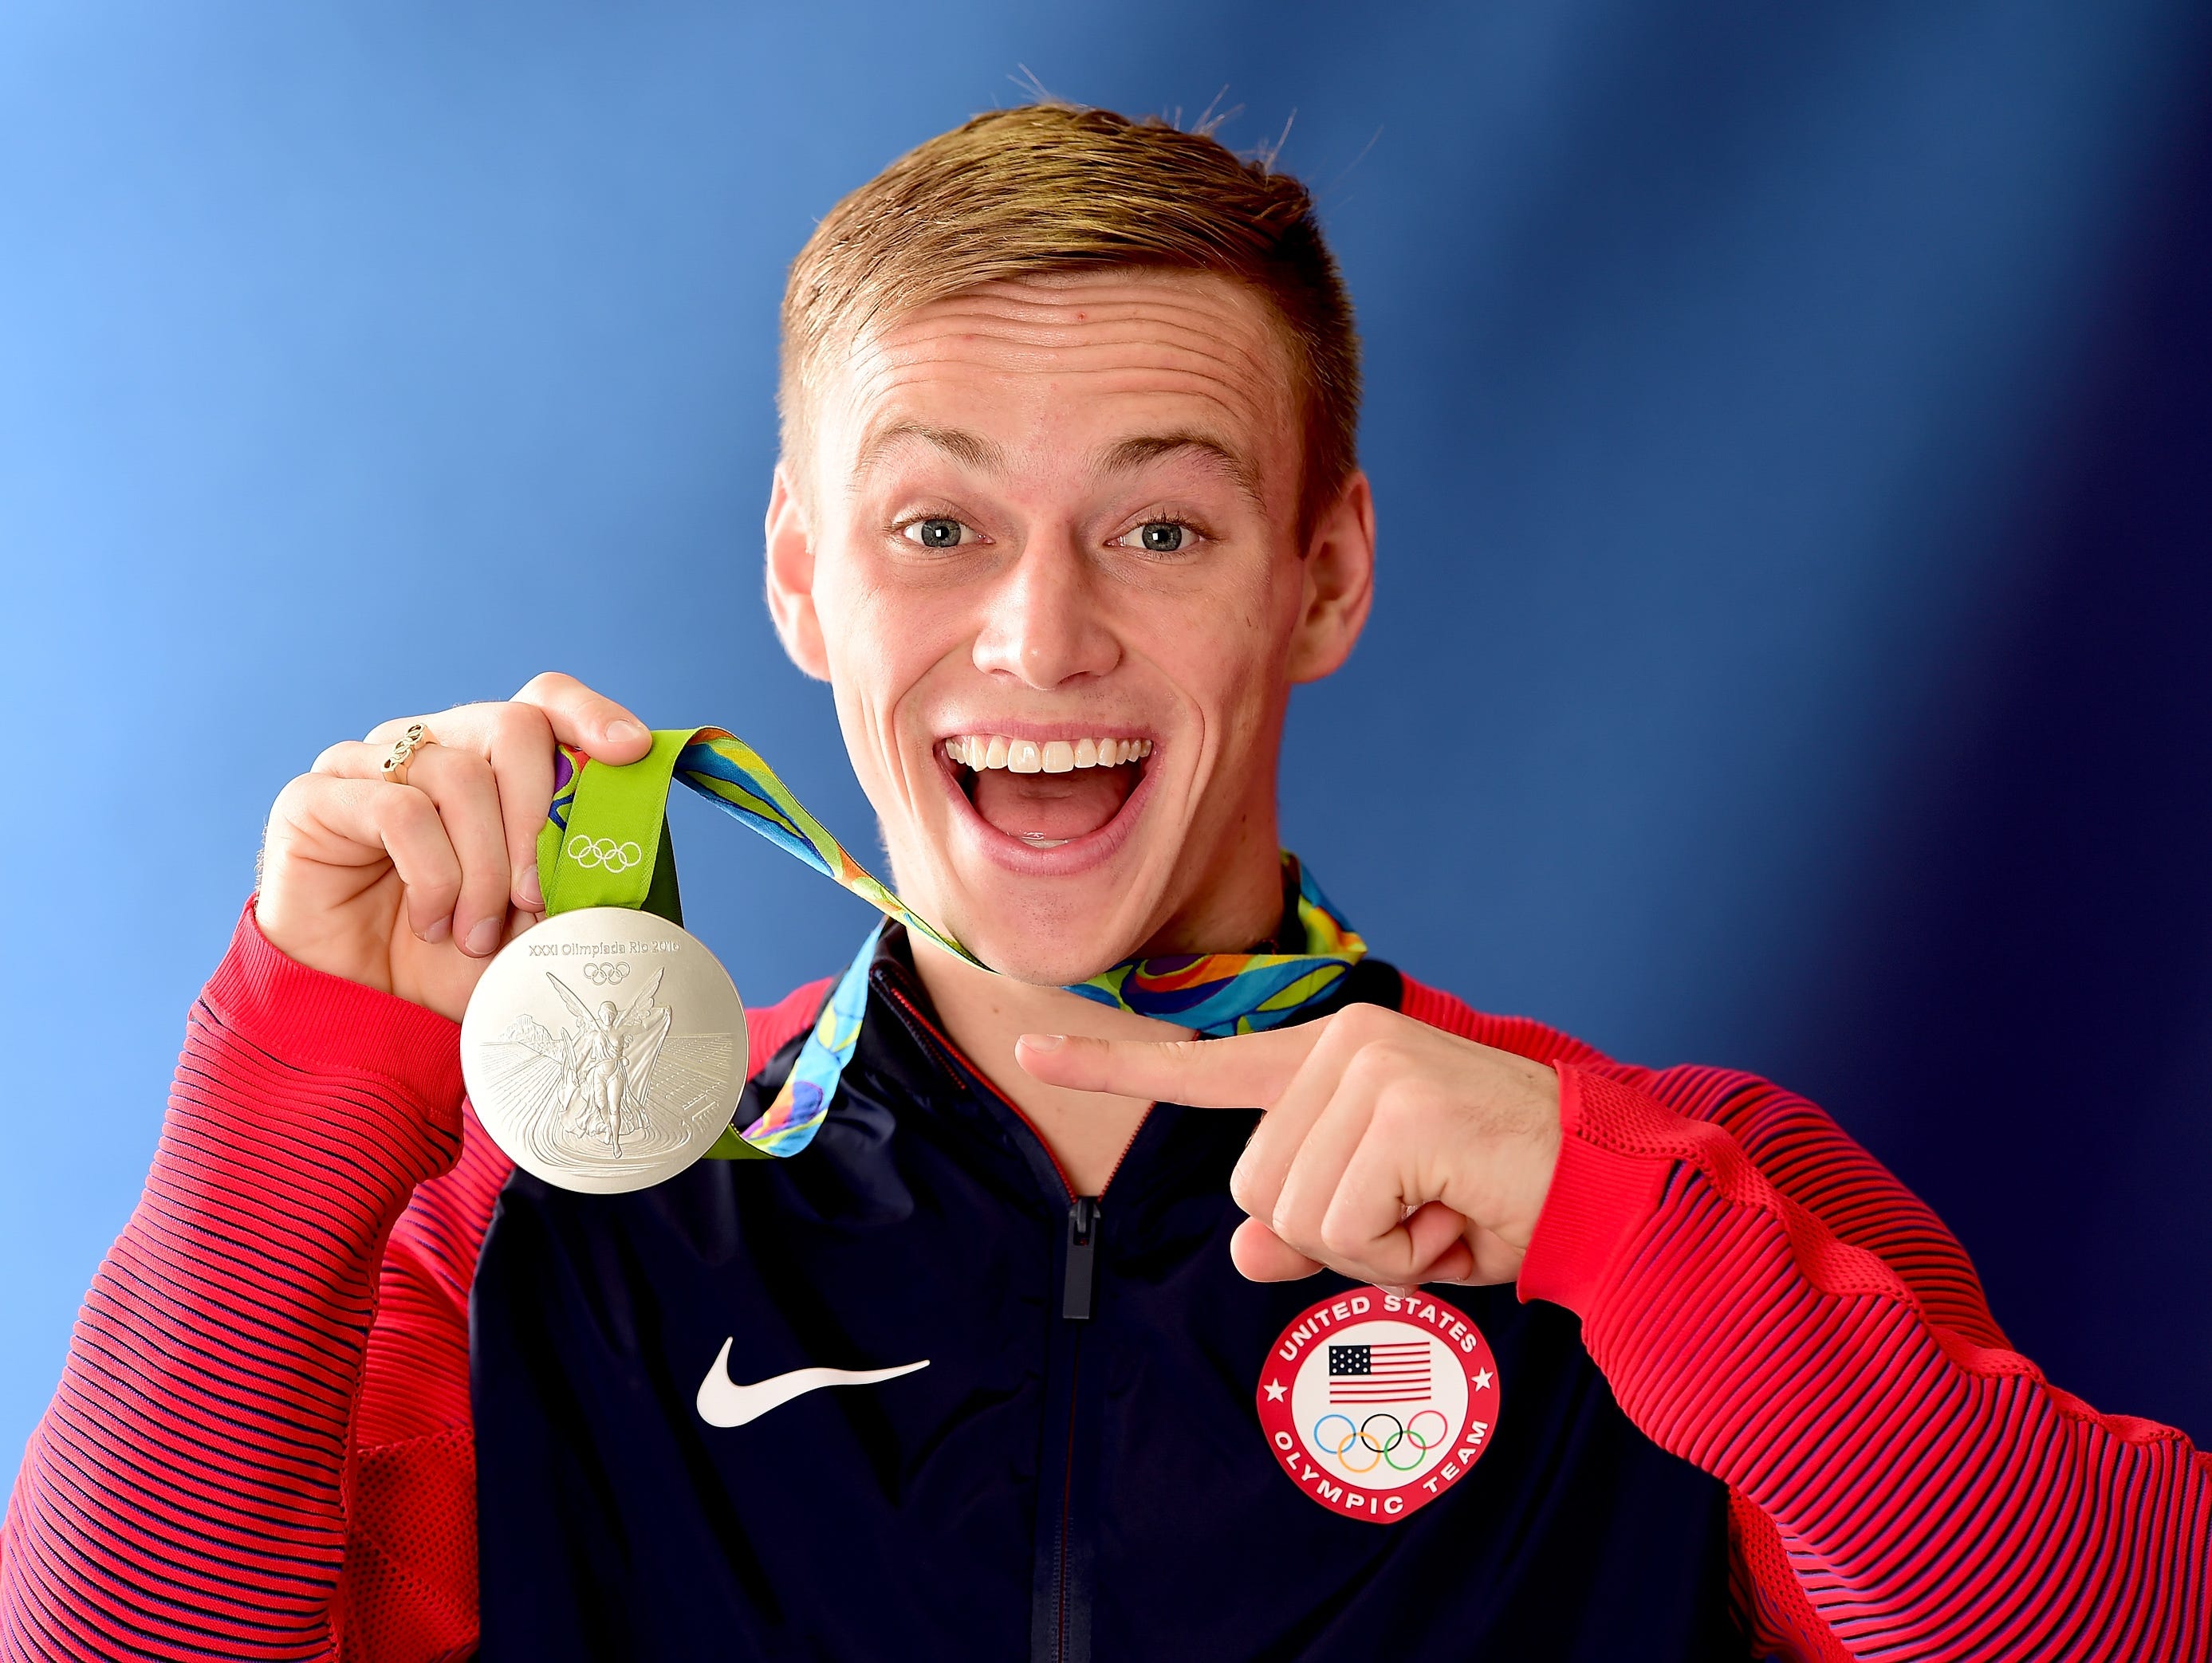 Steele Johnson poses with his silver medal on the Today Show set on Copacabana Beach on August 9, 2016 in Rio de Janeiro, Brazil.